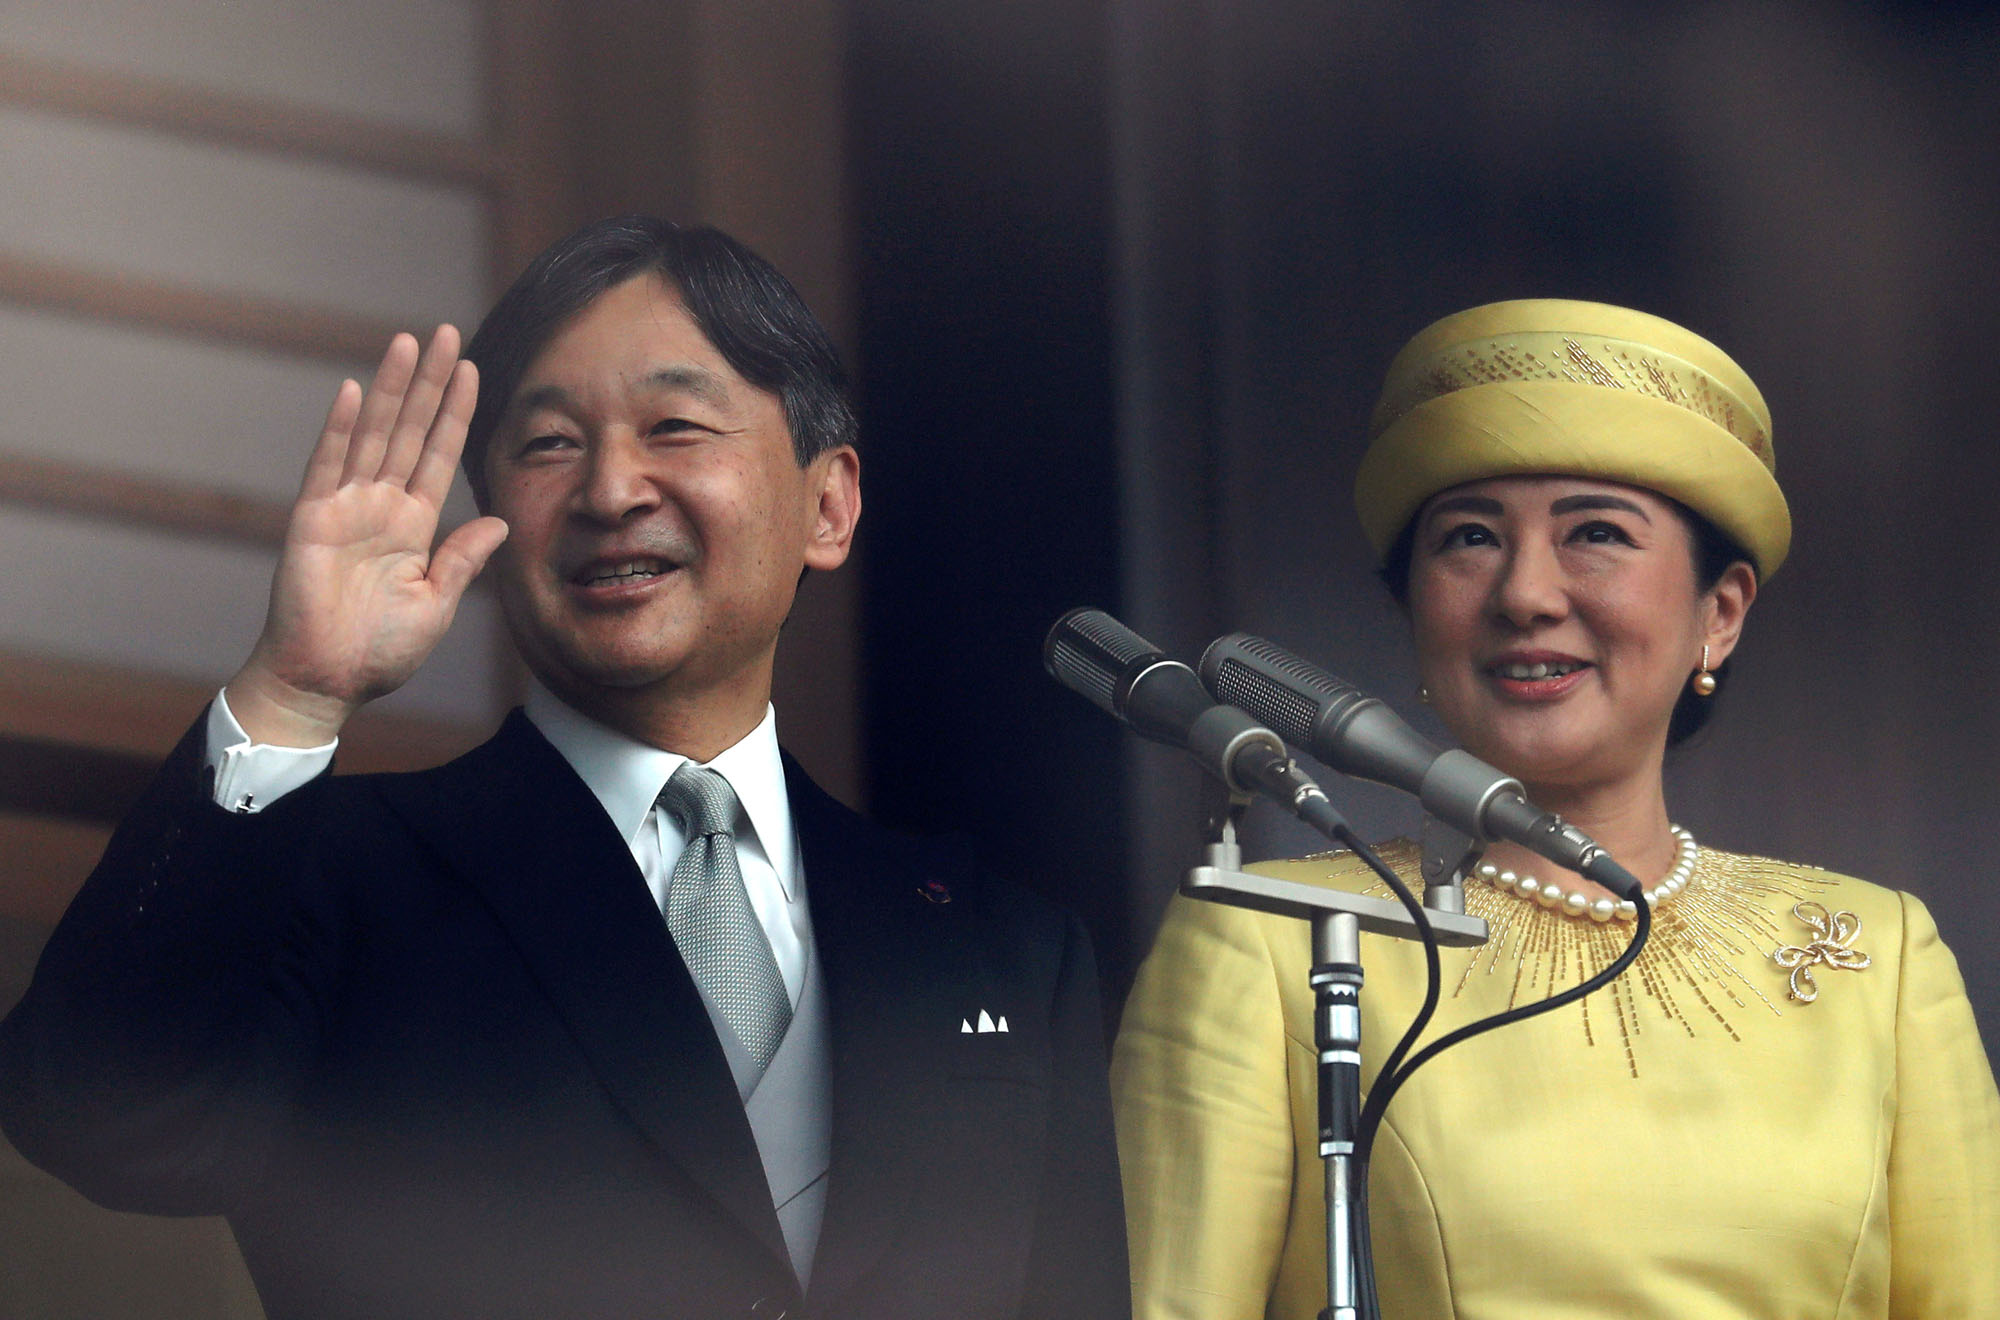 Emperor Naruhito and Empress Masako can serve as role models for a new Japan. | REUTERS